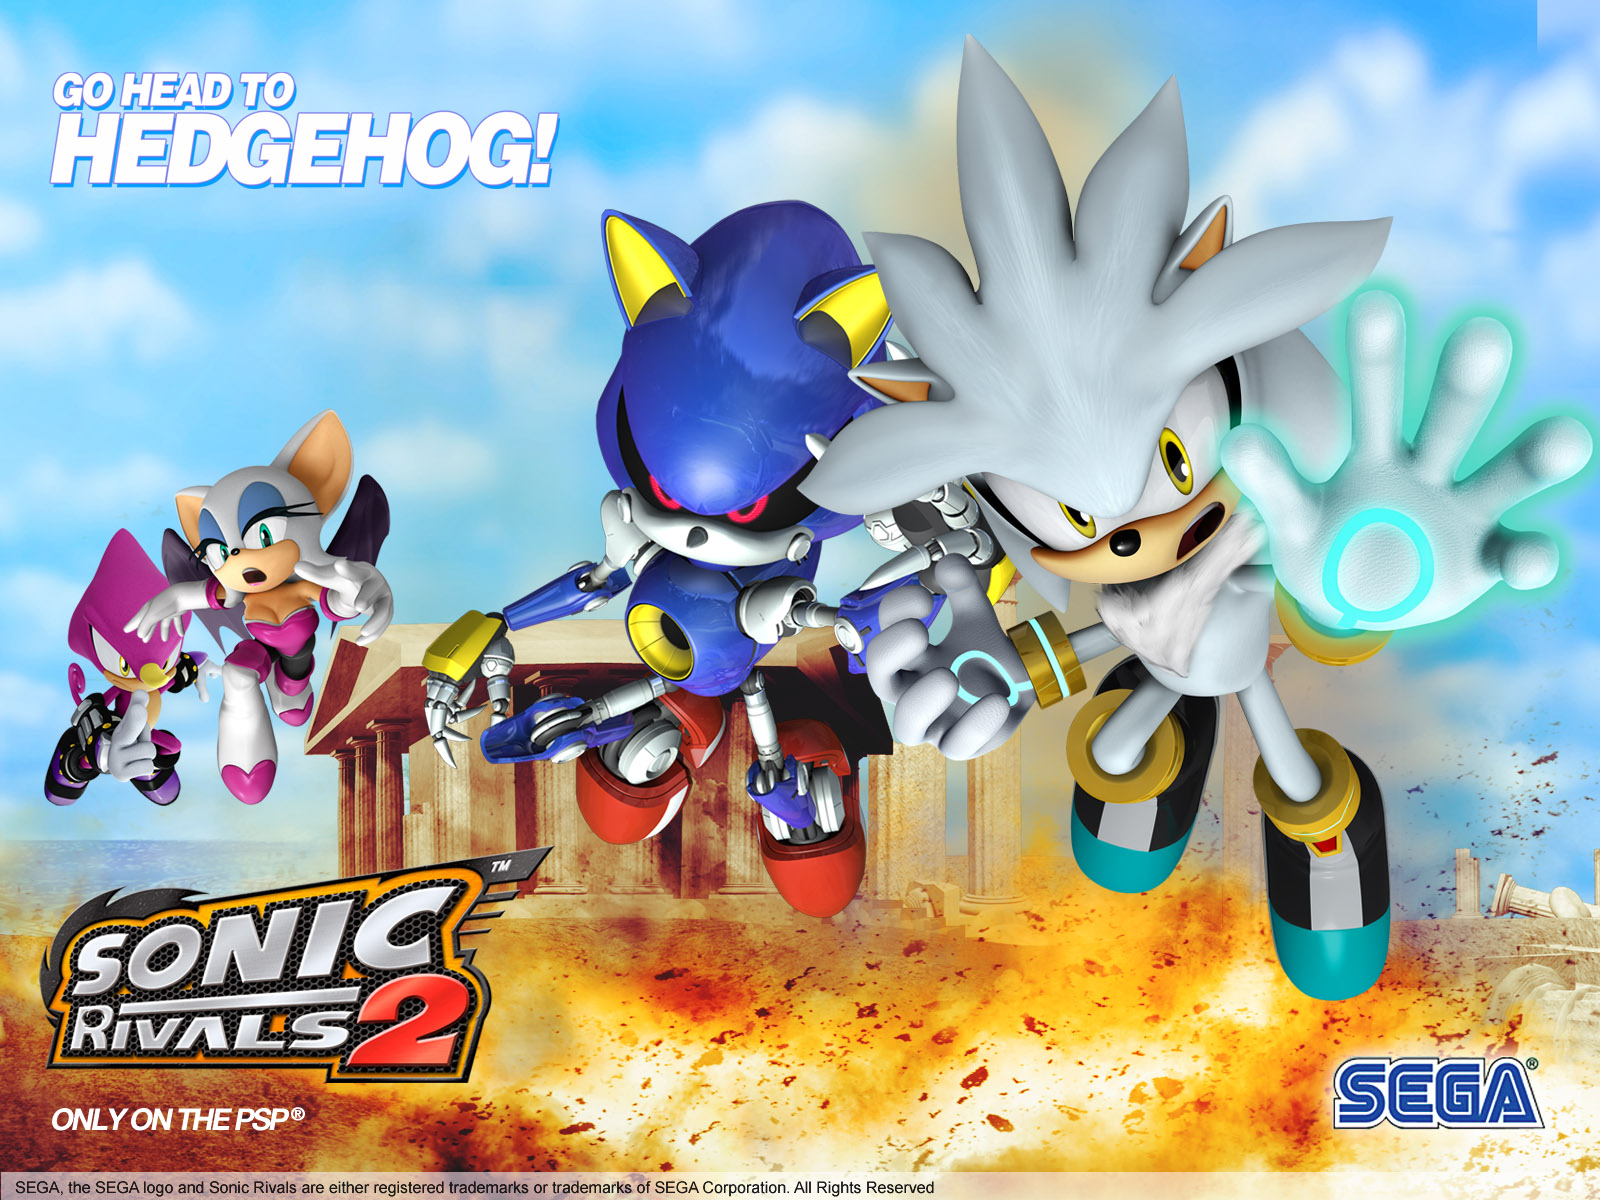 video game, sonic rivals 2, espio the chameleon, metal sonic, rouge the bat, silver the hedgehog, sonic